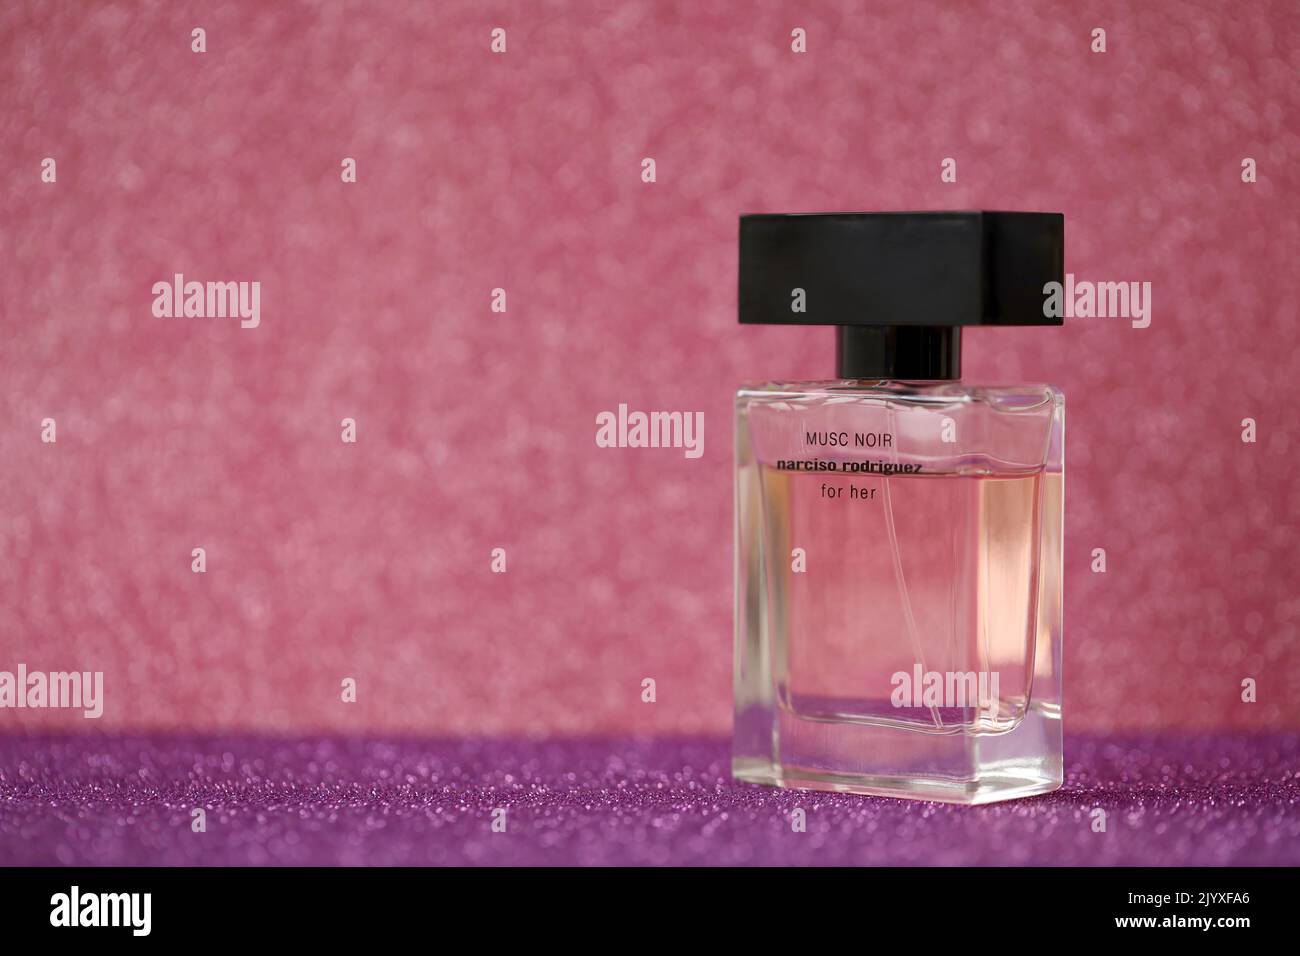 TERNOPIL, UKRAINE - SEPTEMBER 2, 2022 Narciso Rodriguez Musc Noir perfume bottle on shiny glitter background in pink and purple colors Stock Photo